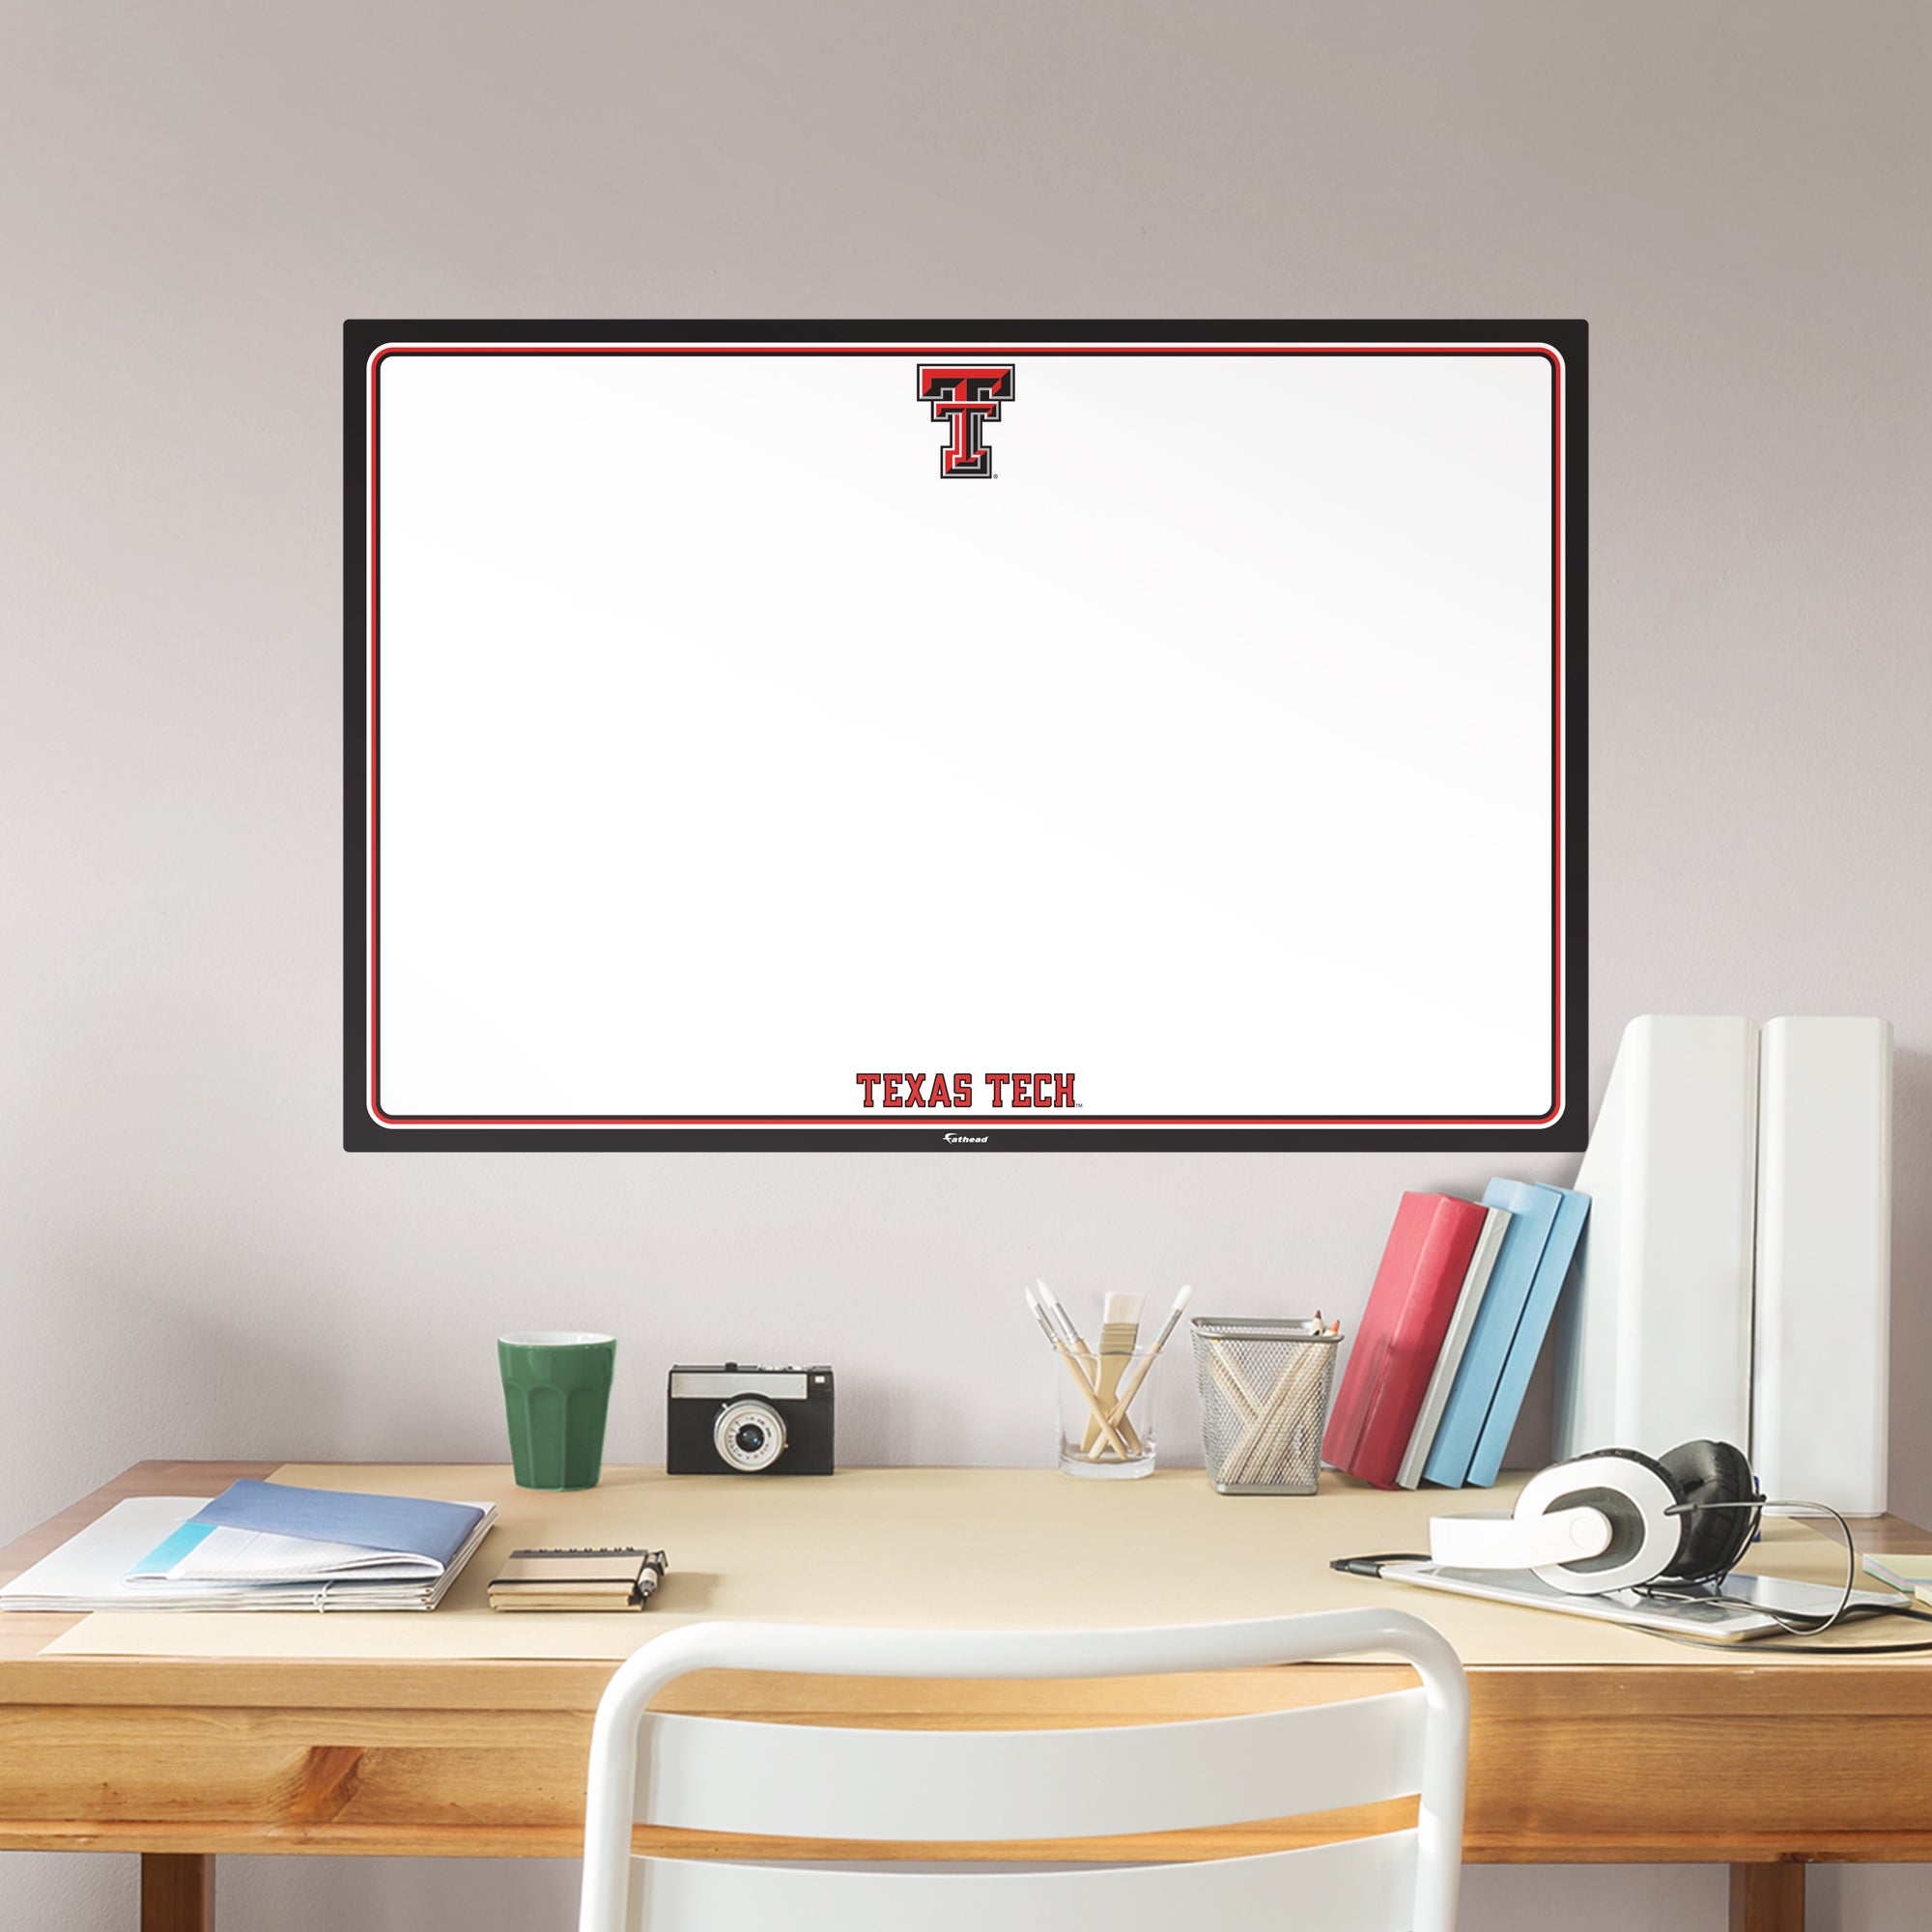 Texas Tech Red Raiders: Dry Erase Whiteboard - X-Large Officially Licensed NCAA Removable Wall Decal XL by Fathead | Vinyl